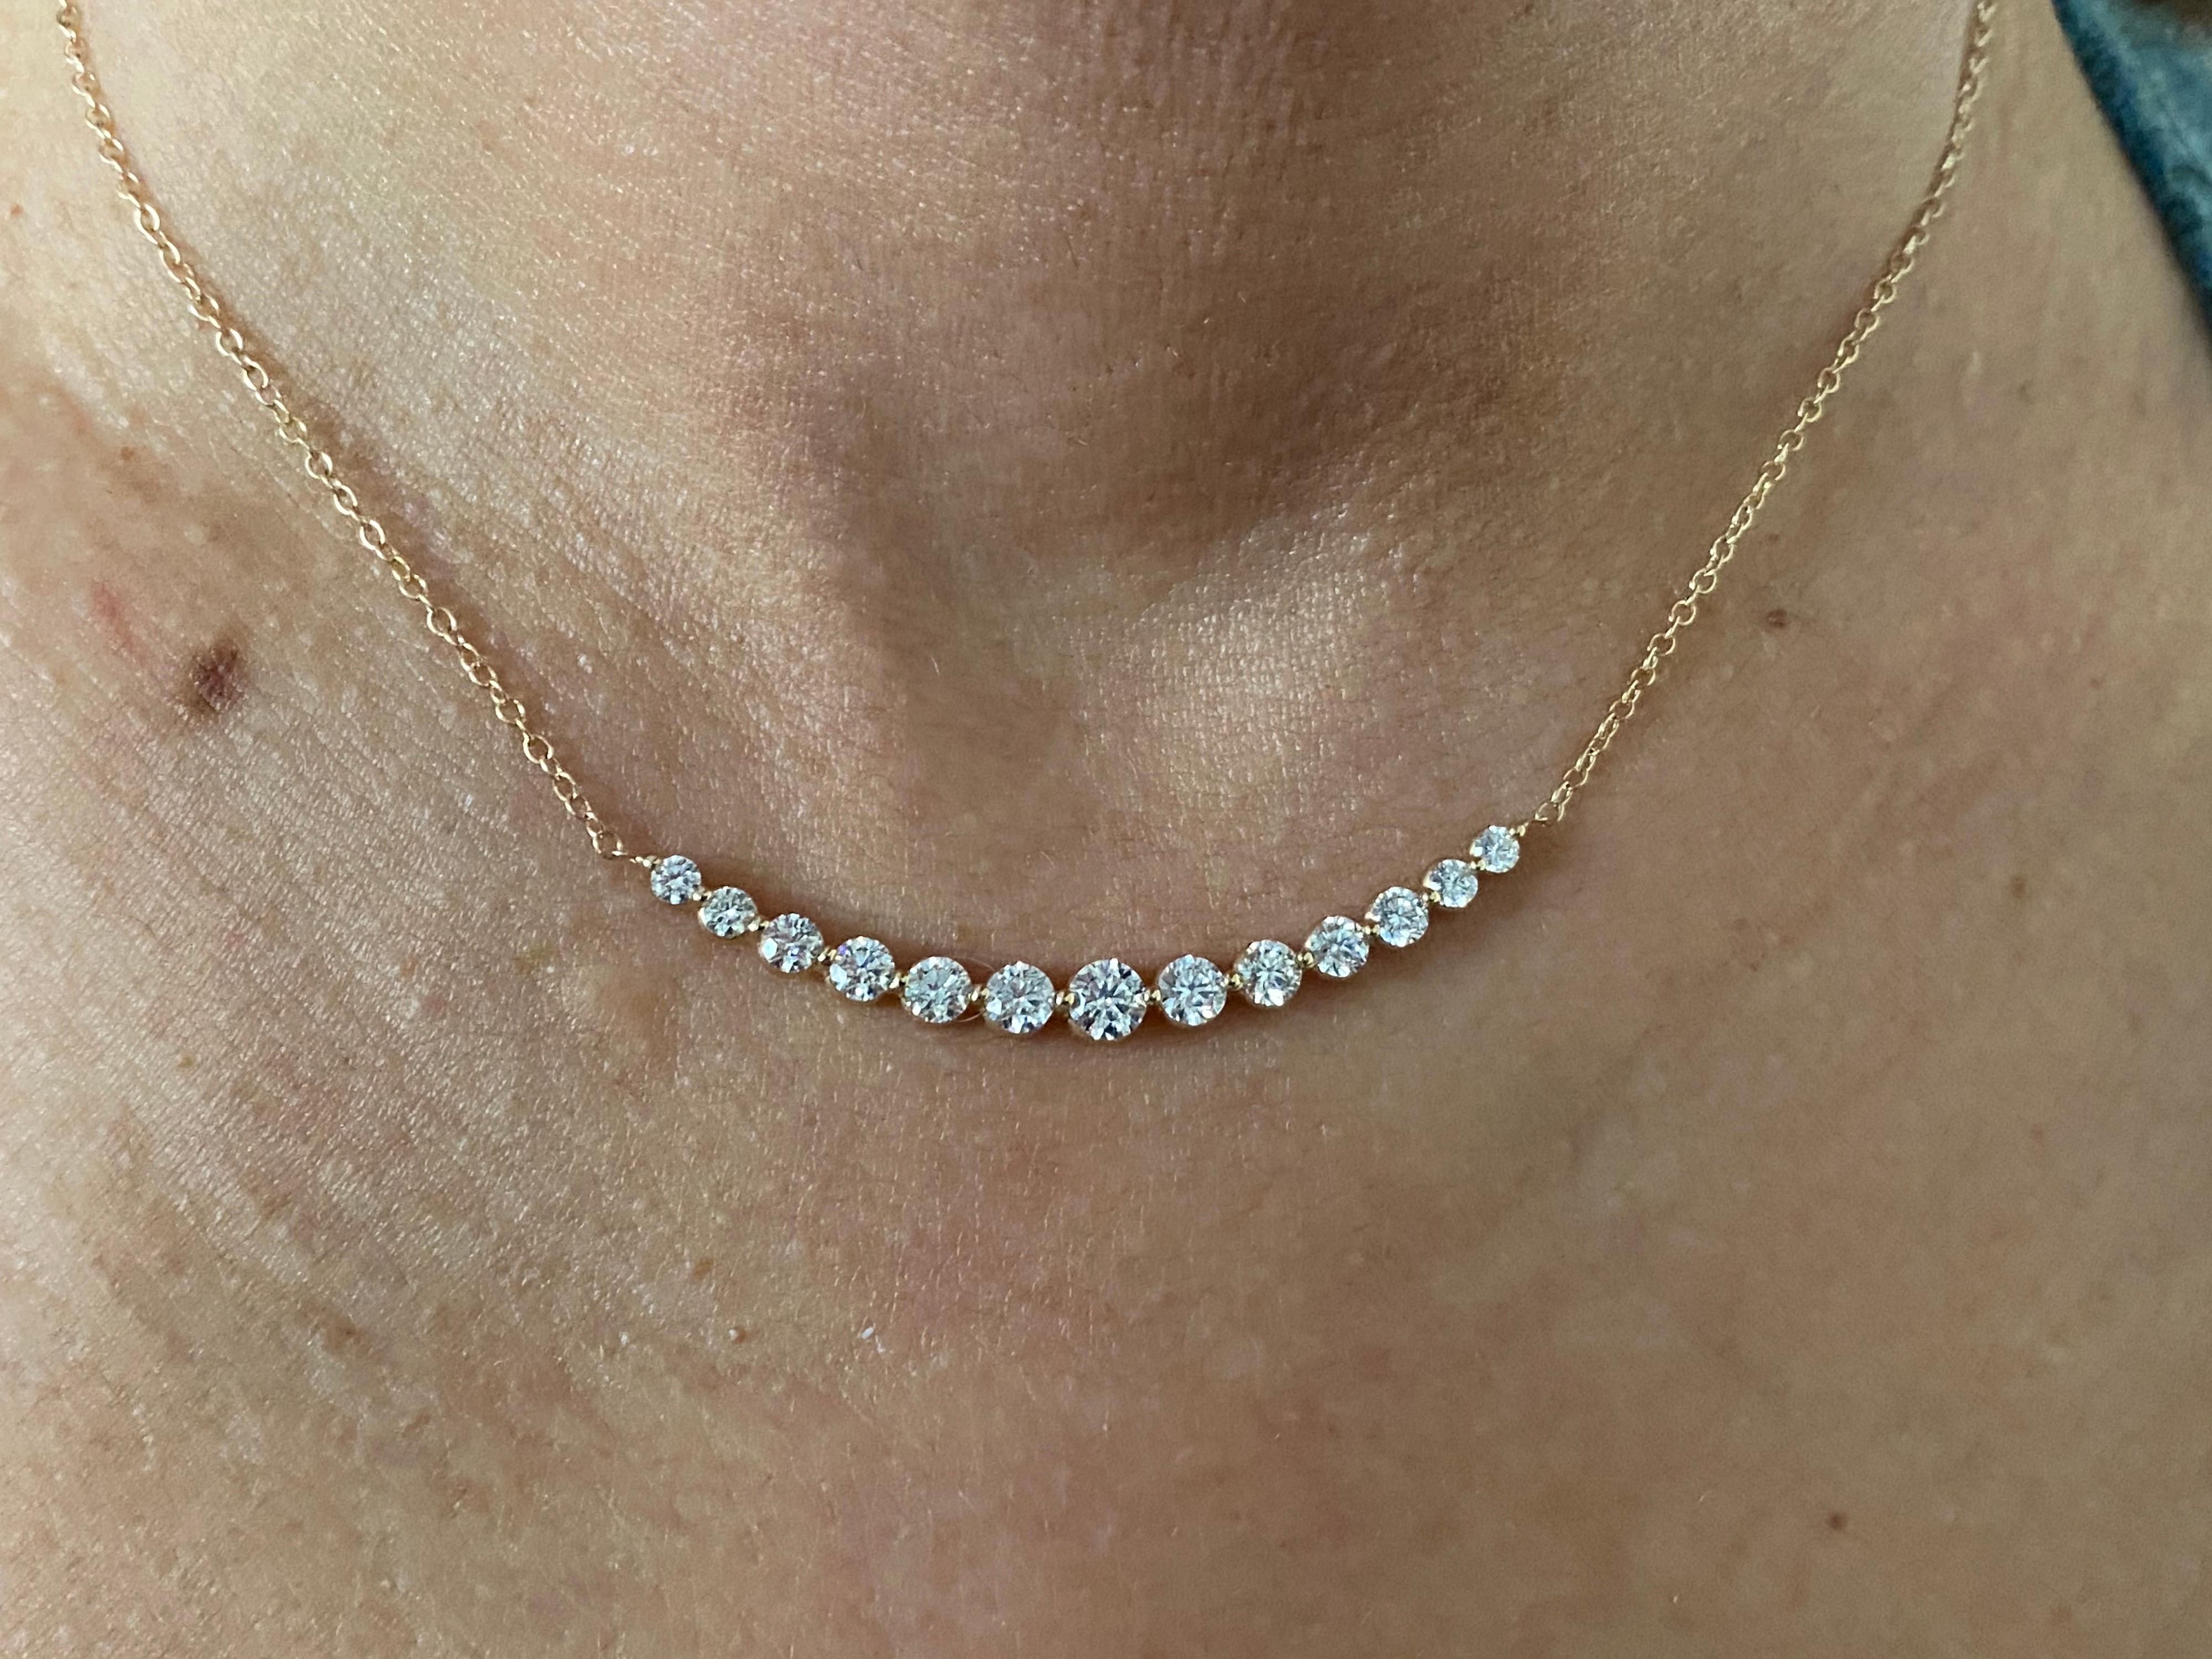 Diamond bar pendant set in 14K yellow gold. The center stone weighs 0.30 carats. The total carat weight of the pendant is 1.70 carats. The stones are graduated in size. The color of the diamonds are G, the clarity is SI. The total length of the